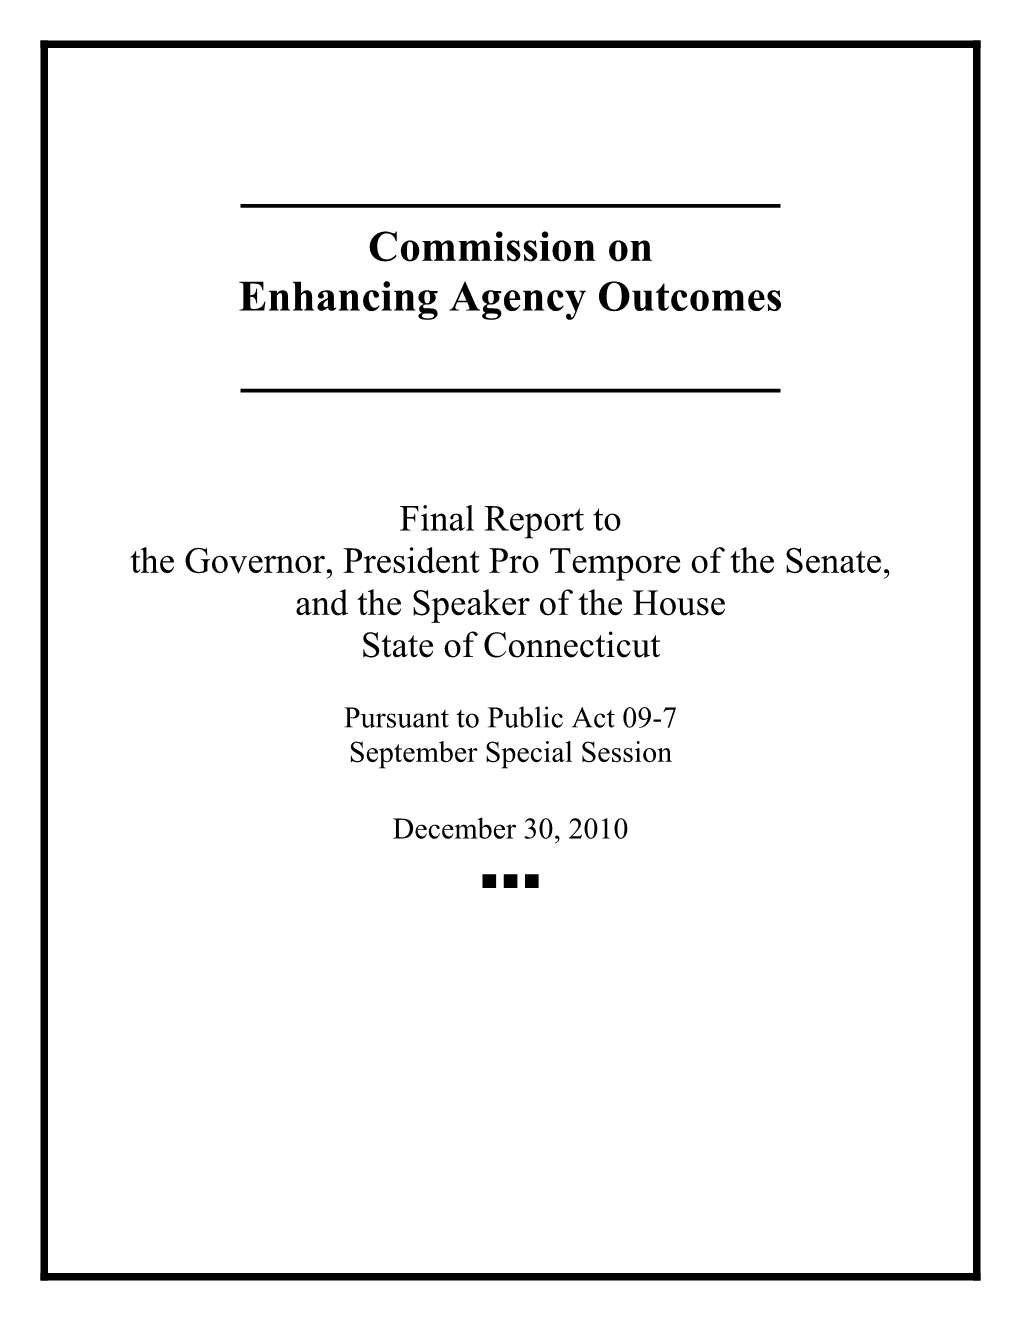 Connecticut Commission on Enhancing Agency Outcomes